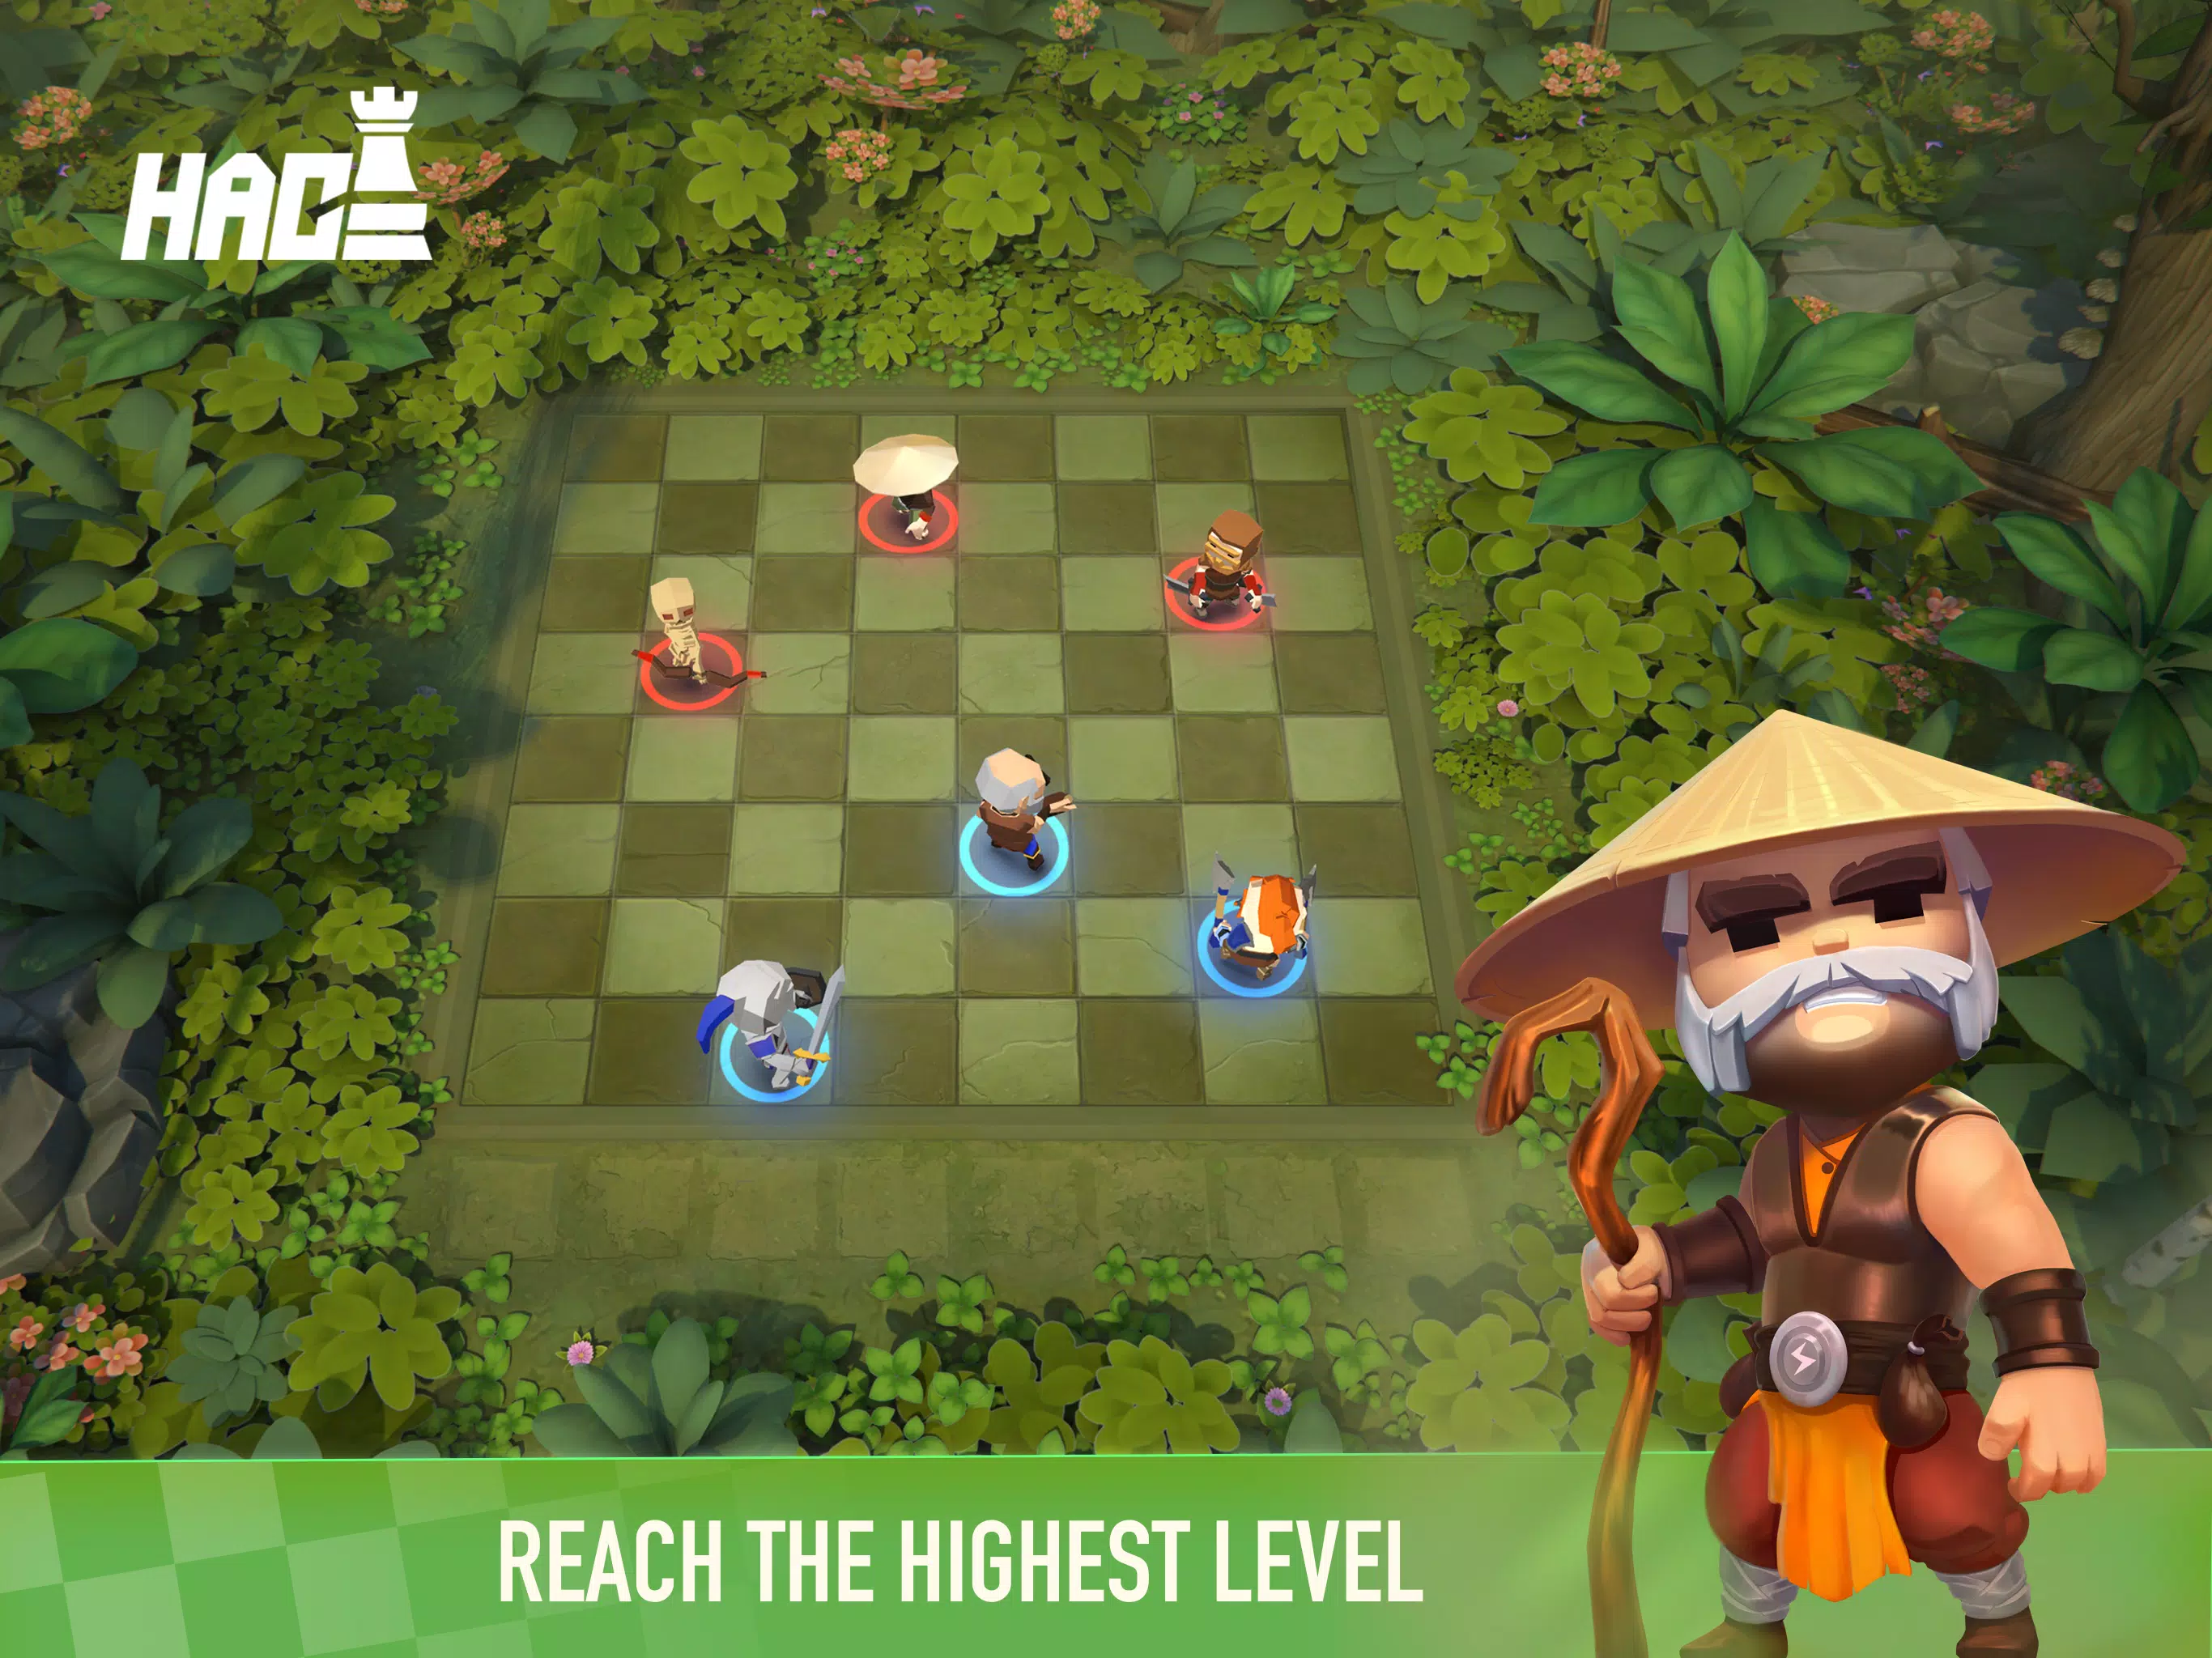 Download ♟️ Heroes Auto Chess - Free RPG Chess Game (Mod Money) For Android, ♟️ Heroes Auto Chess - Free RPG Chess Game (Mod Money) APK